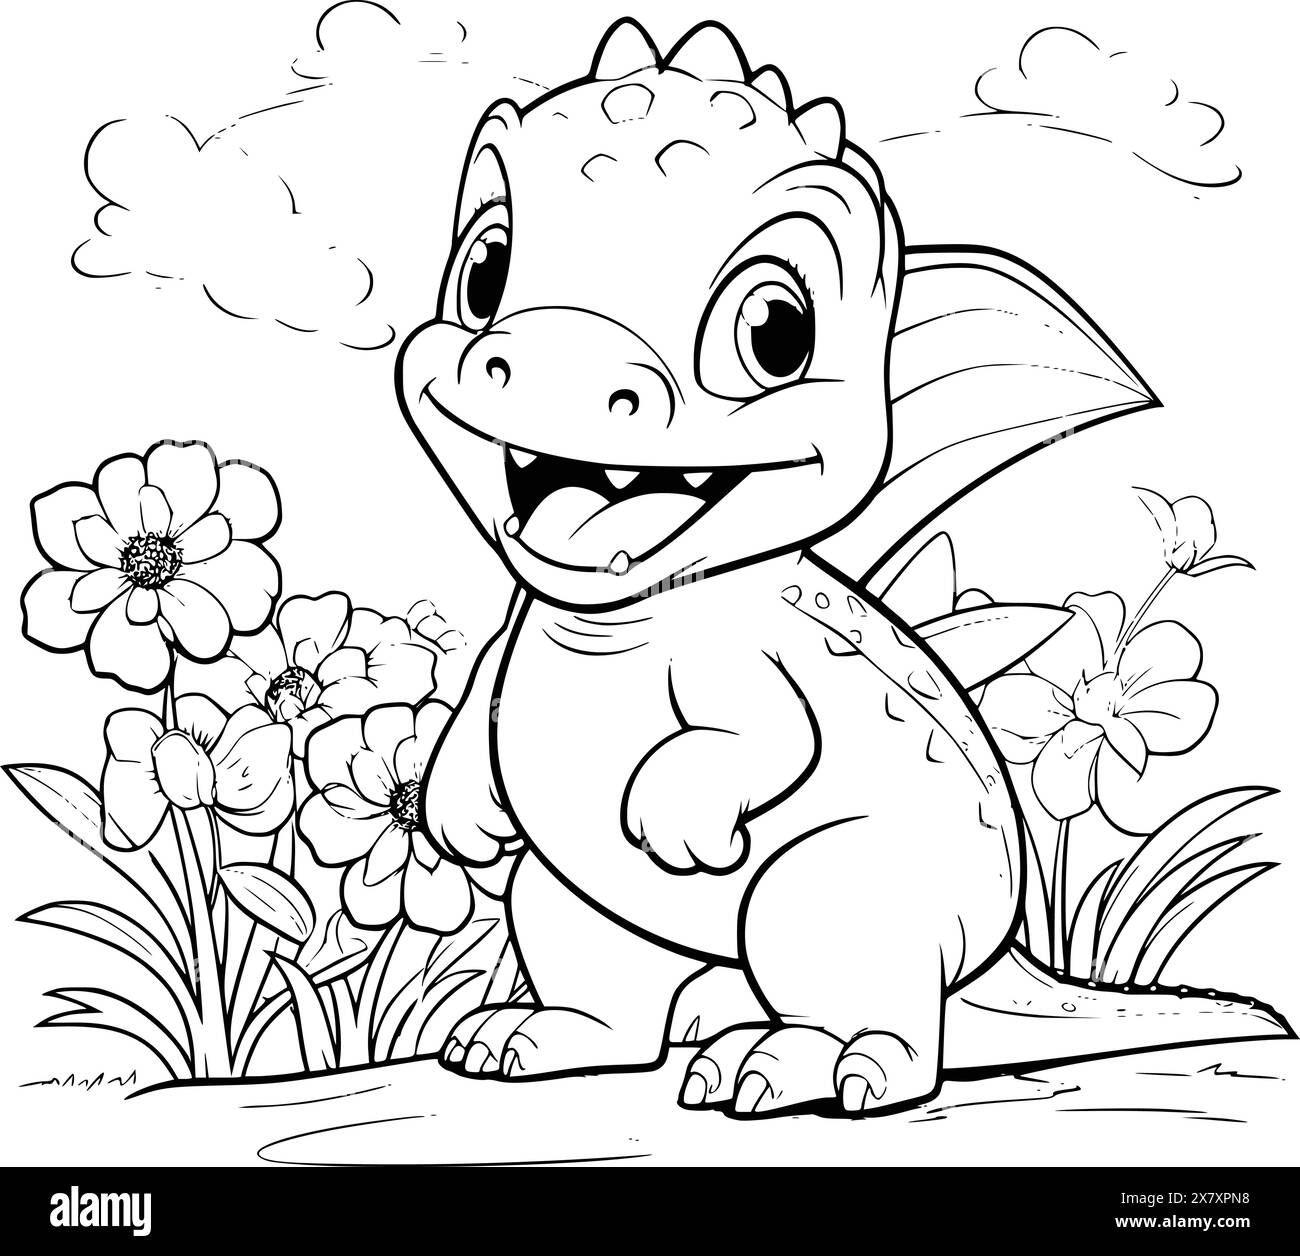 Dinosaur With A Flower Coloring Page For Kids Stock Vector